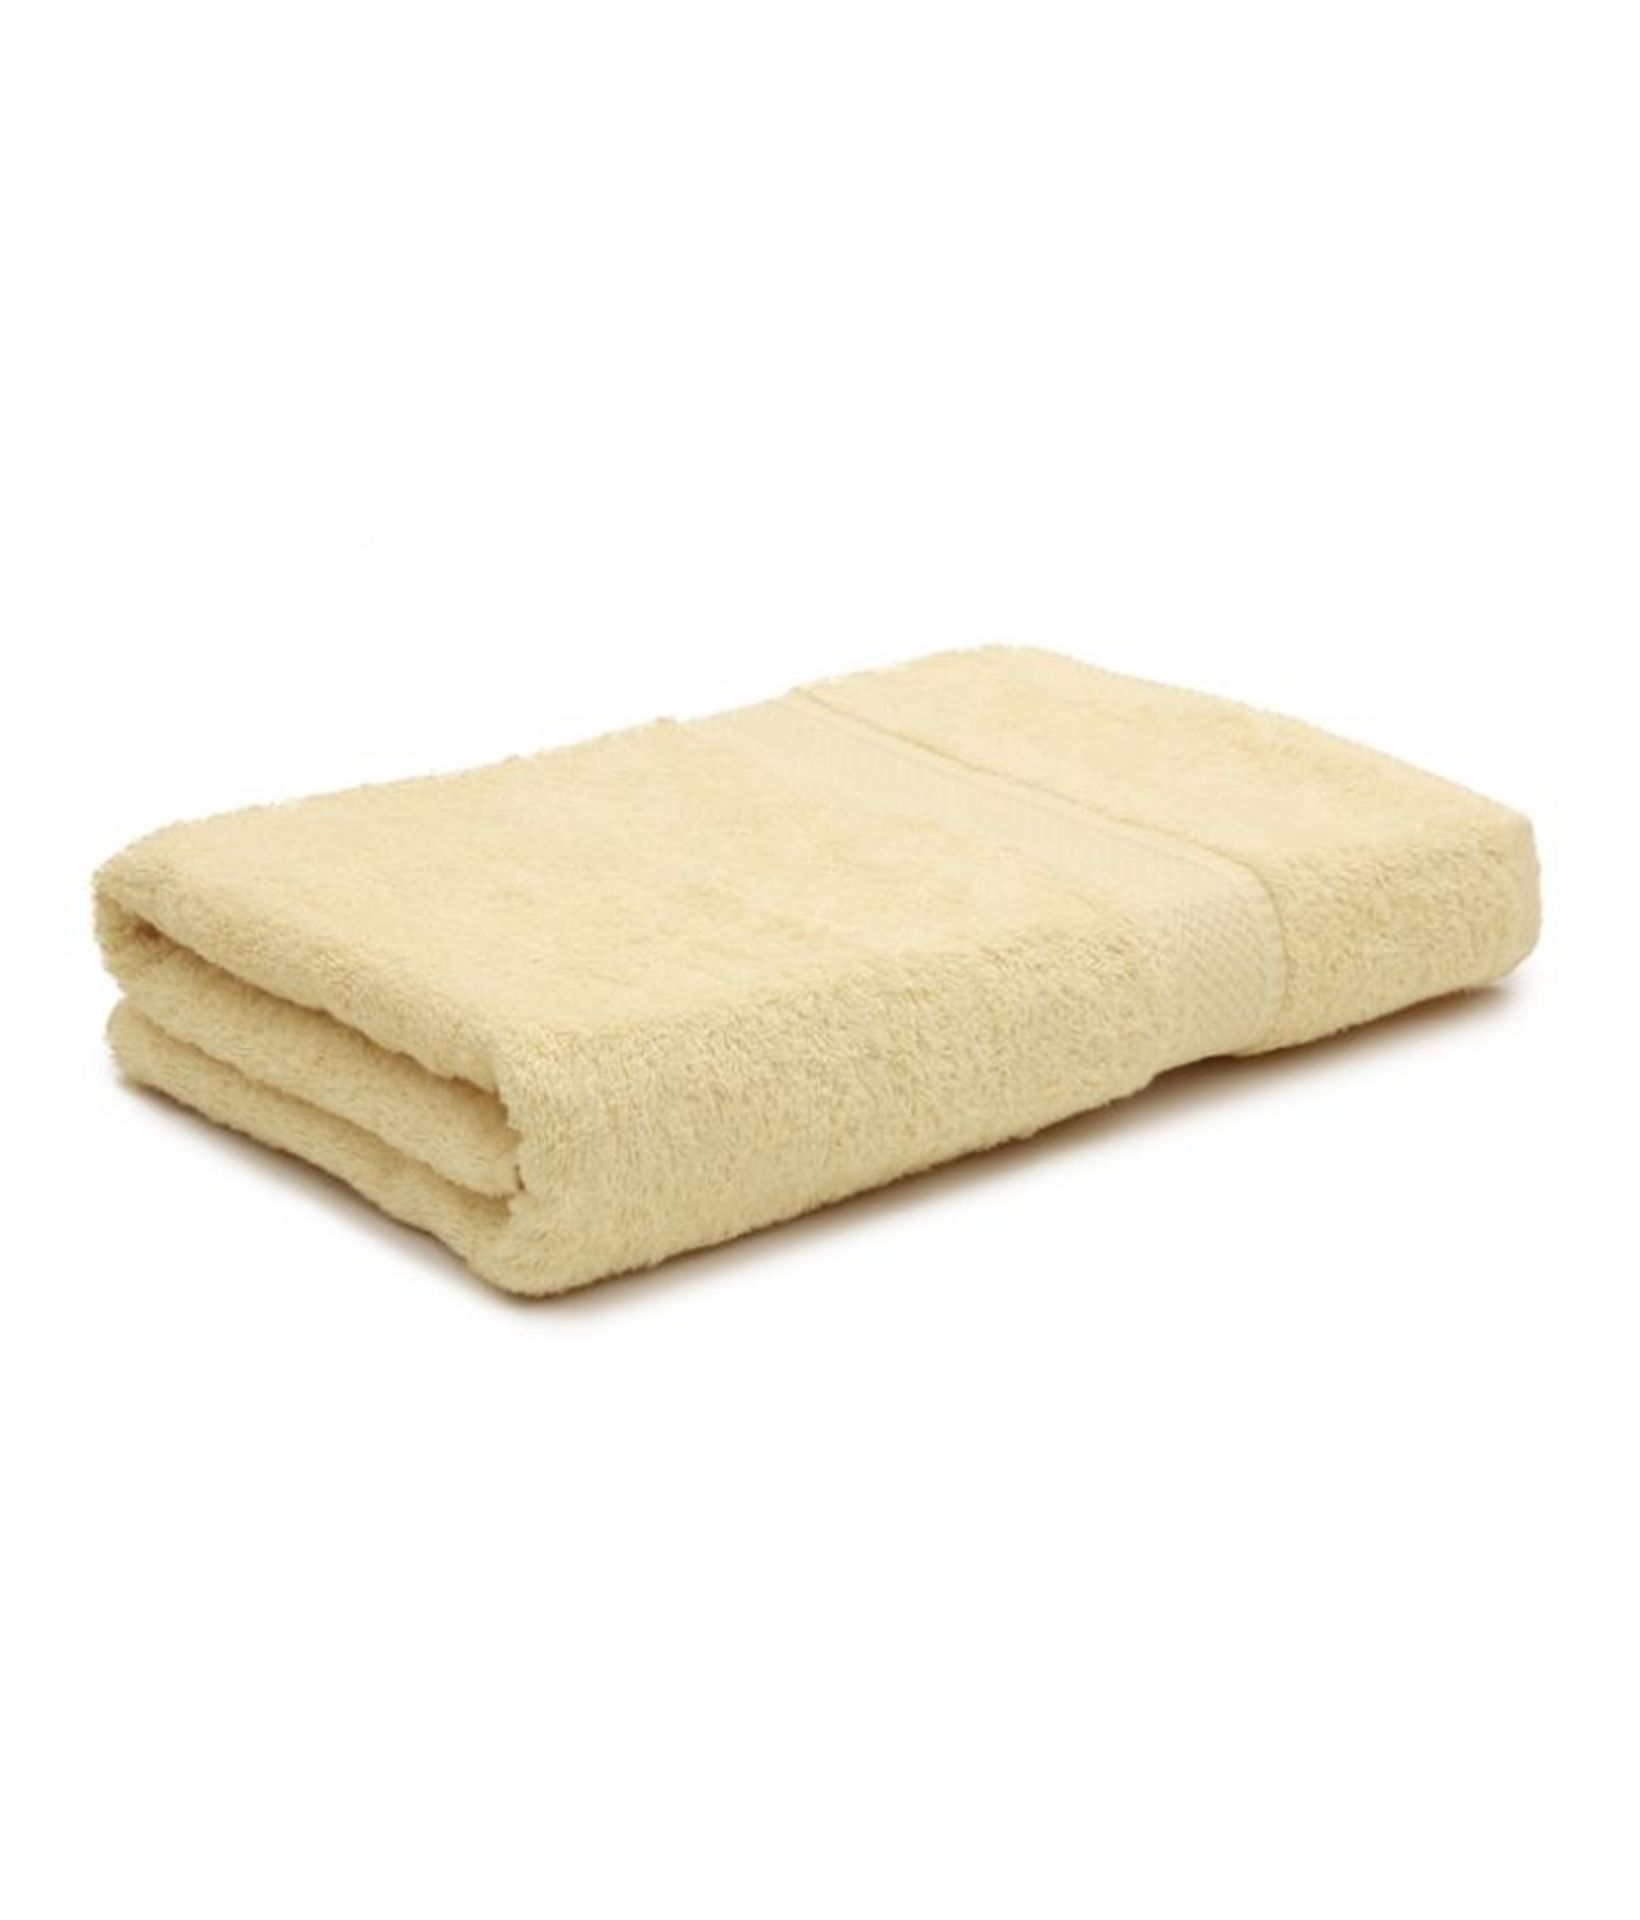 V Brand New 100% Cotton Bath Towel 125 x 70 cm - Cream X 2 YOUR BID PRICE TO BE MULTIPLIED BY TWO